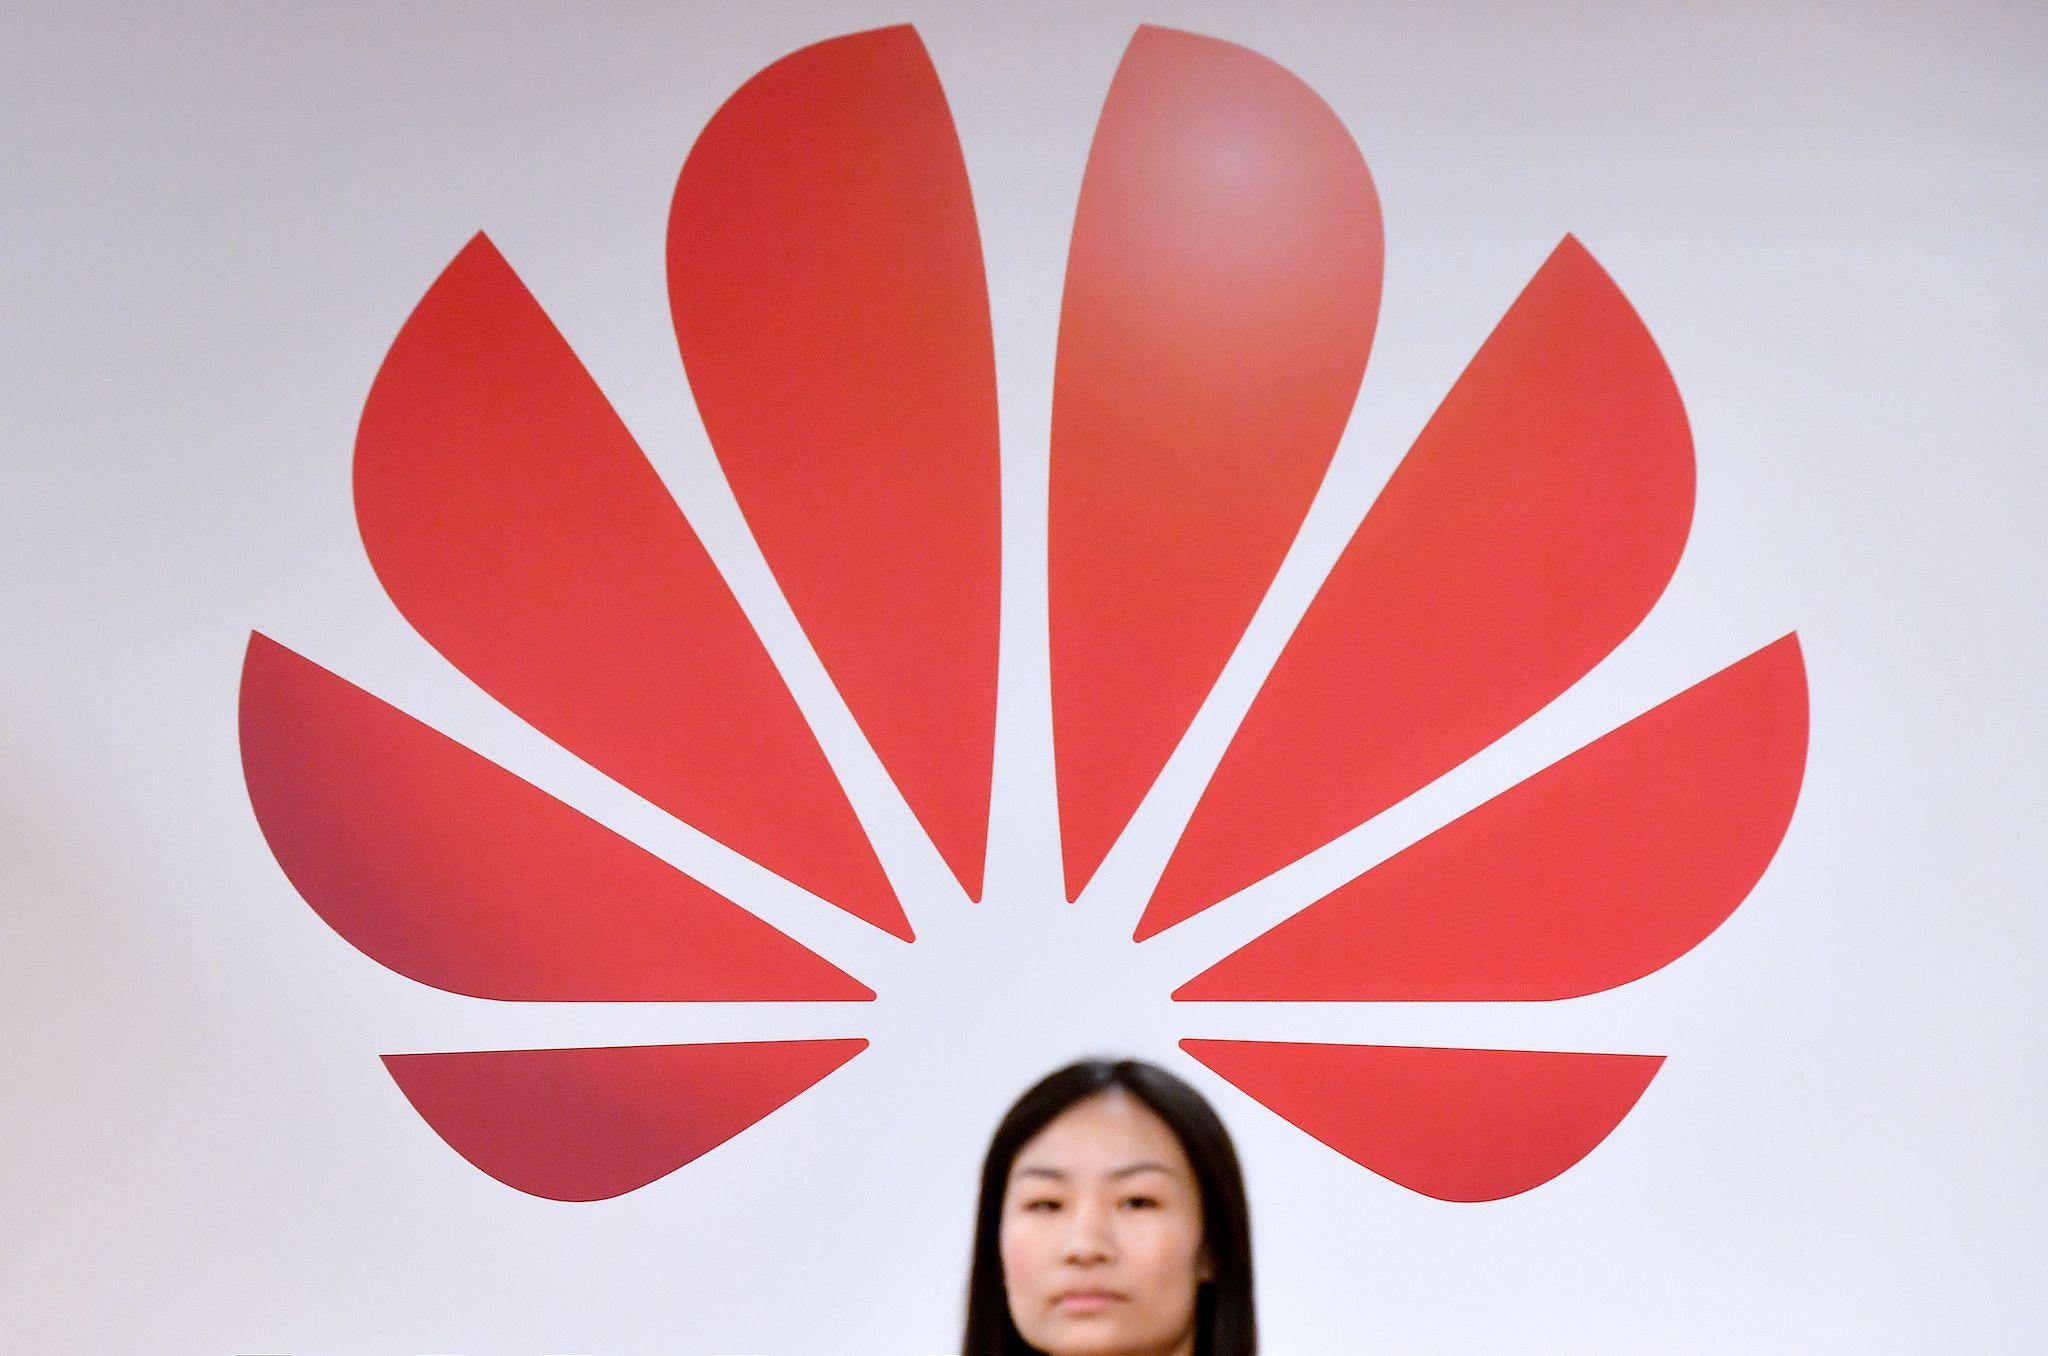 A woman walks past a logo at the entrance of the European Huawei Cyber Security Transparency Centre during its opening in Brussels on March 5, 2019